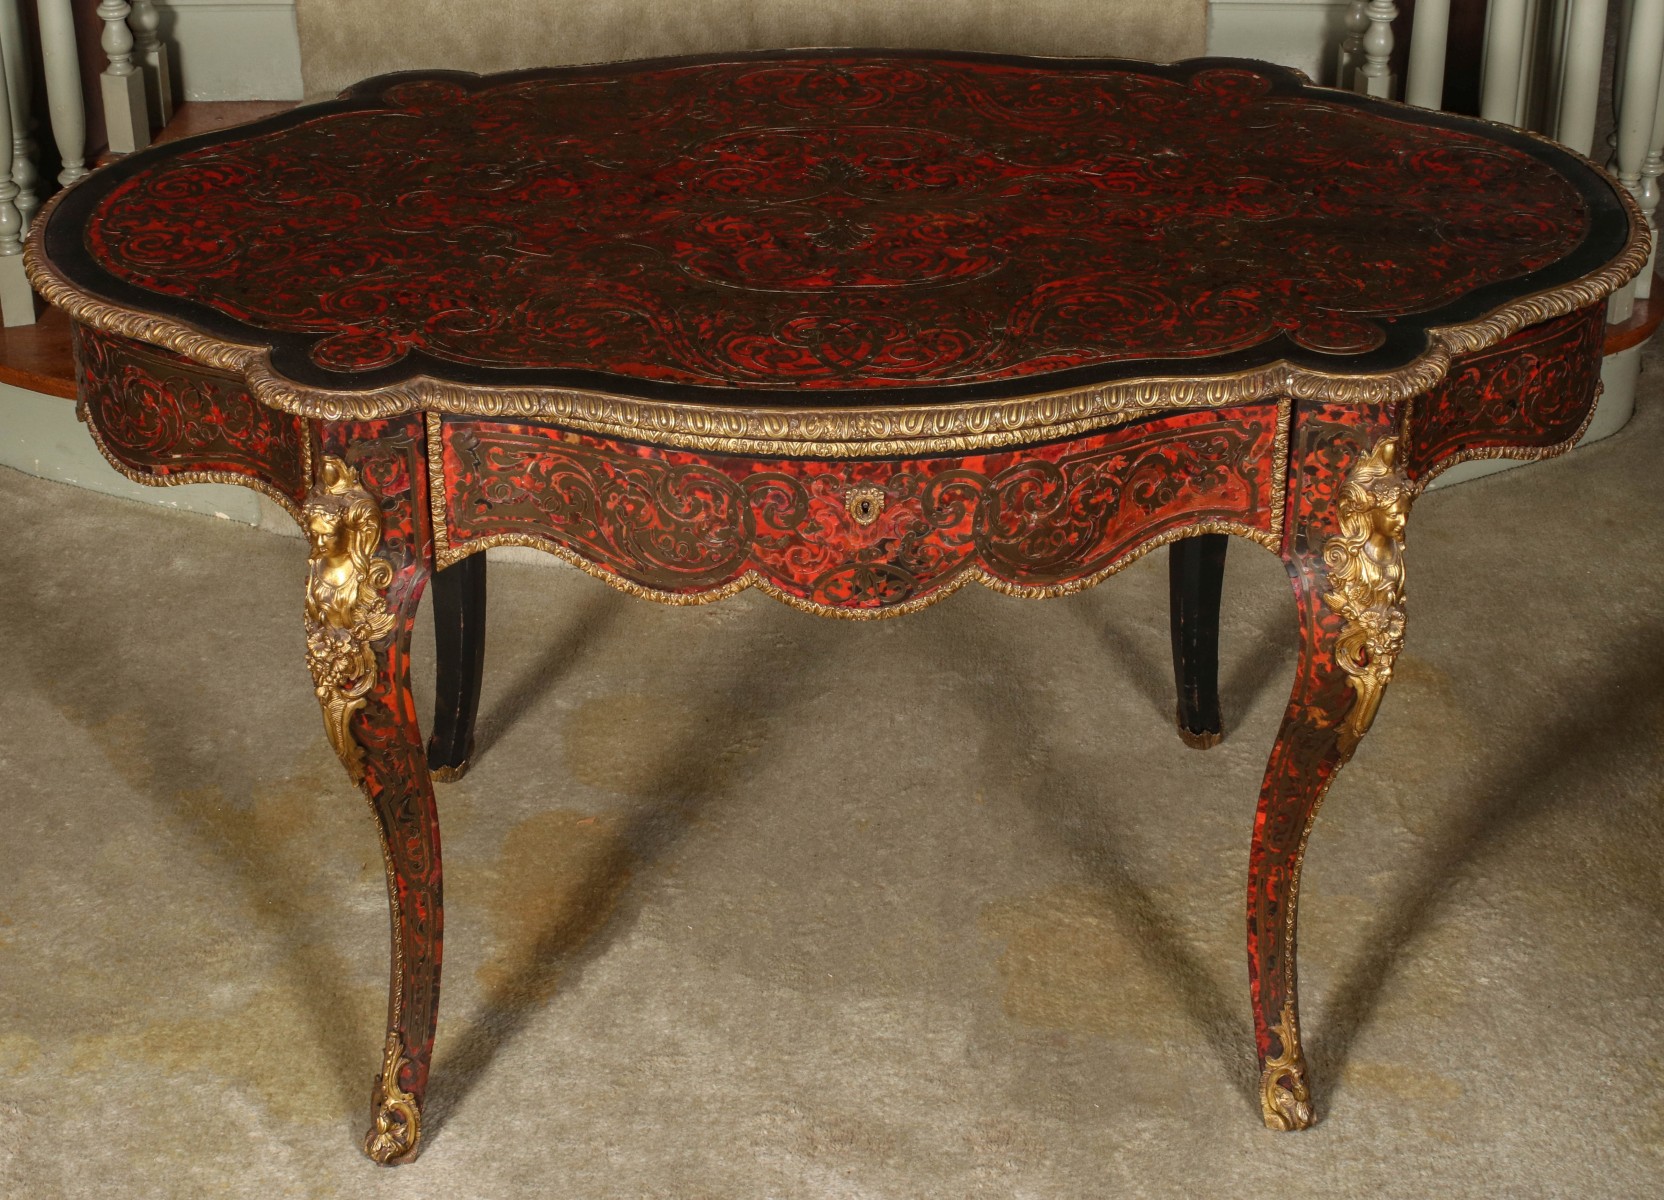 A LARGE 19TH CENTURY FRENCH BOULLE STYLE CENTER TABLE